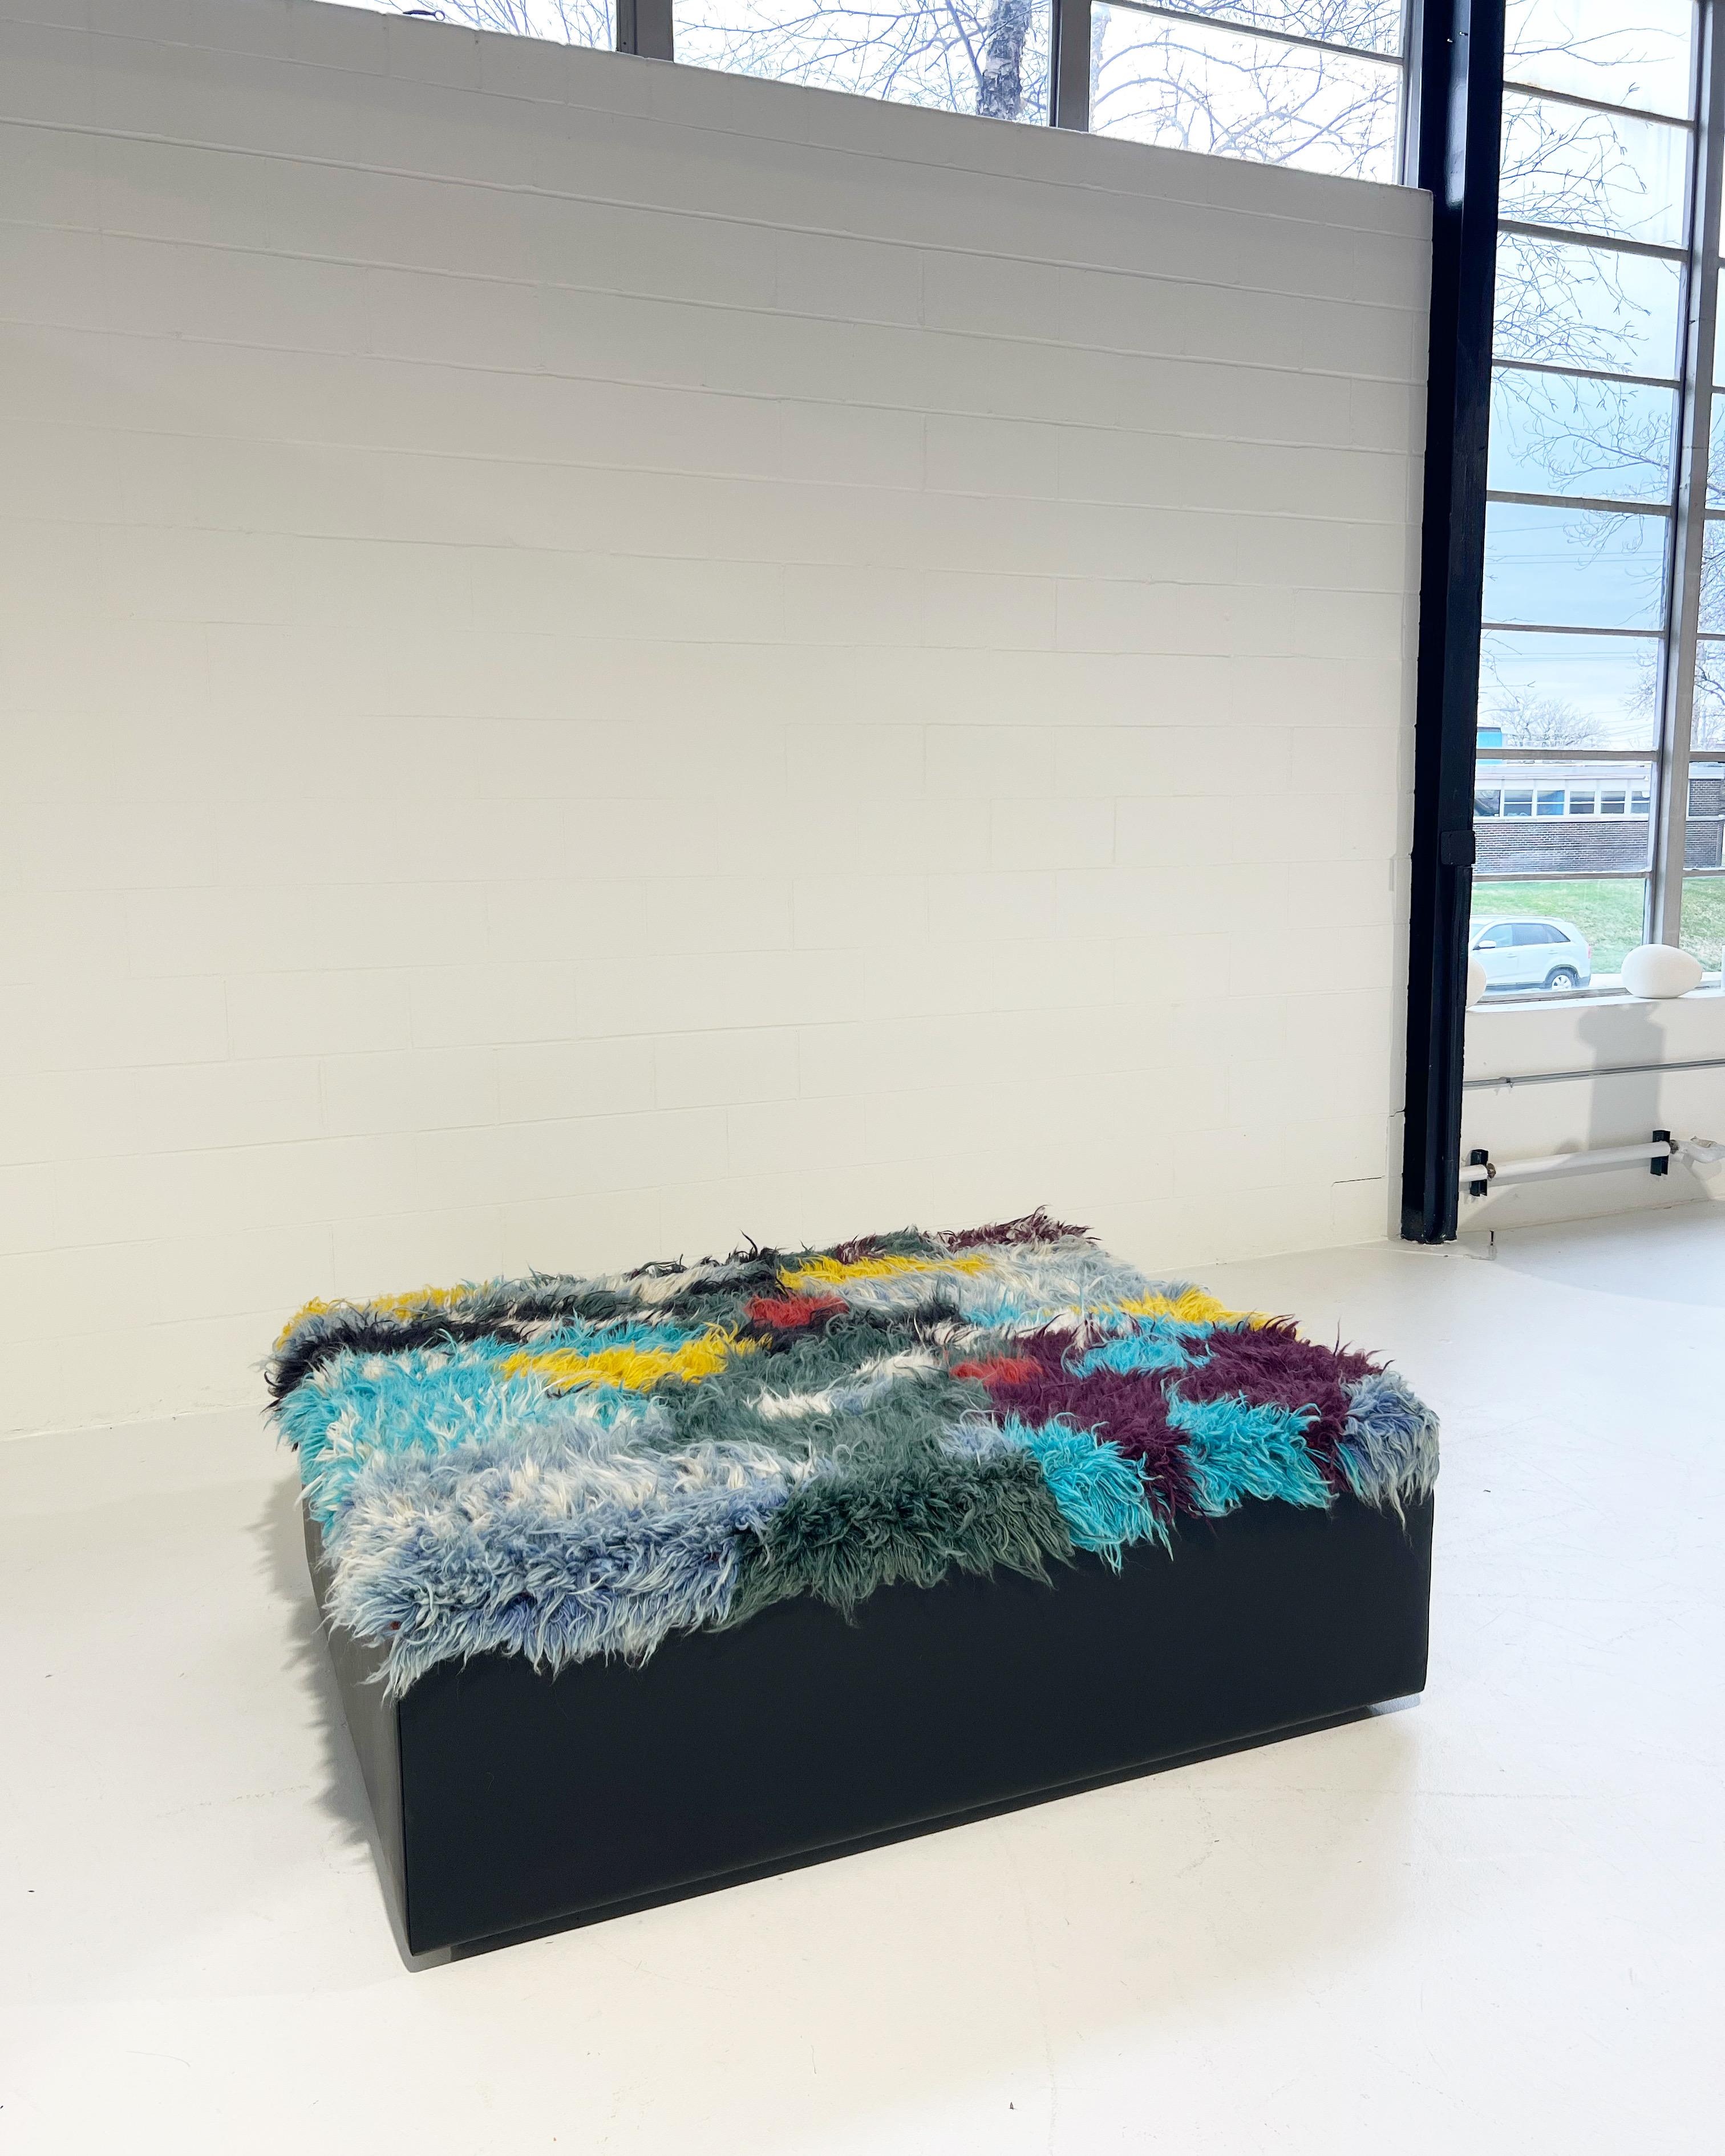 A one-of-a-kind ottoman designed by Forsyth and beautifully handmade using a vintage Iranian gabbeh rug (100% hand-spun sheep wool). The rug is finished with luxurious leather sides. The perfect coffee table, ottoman, or extra seating.